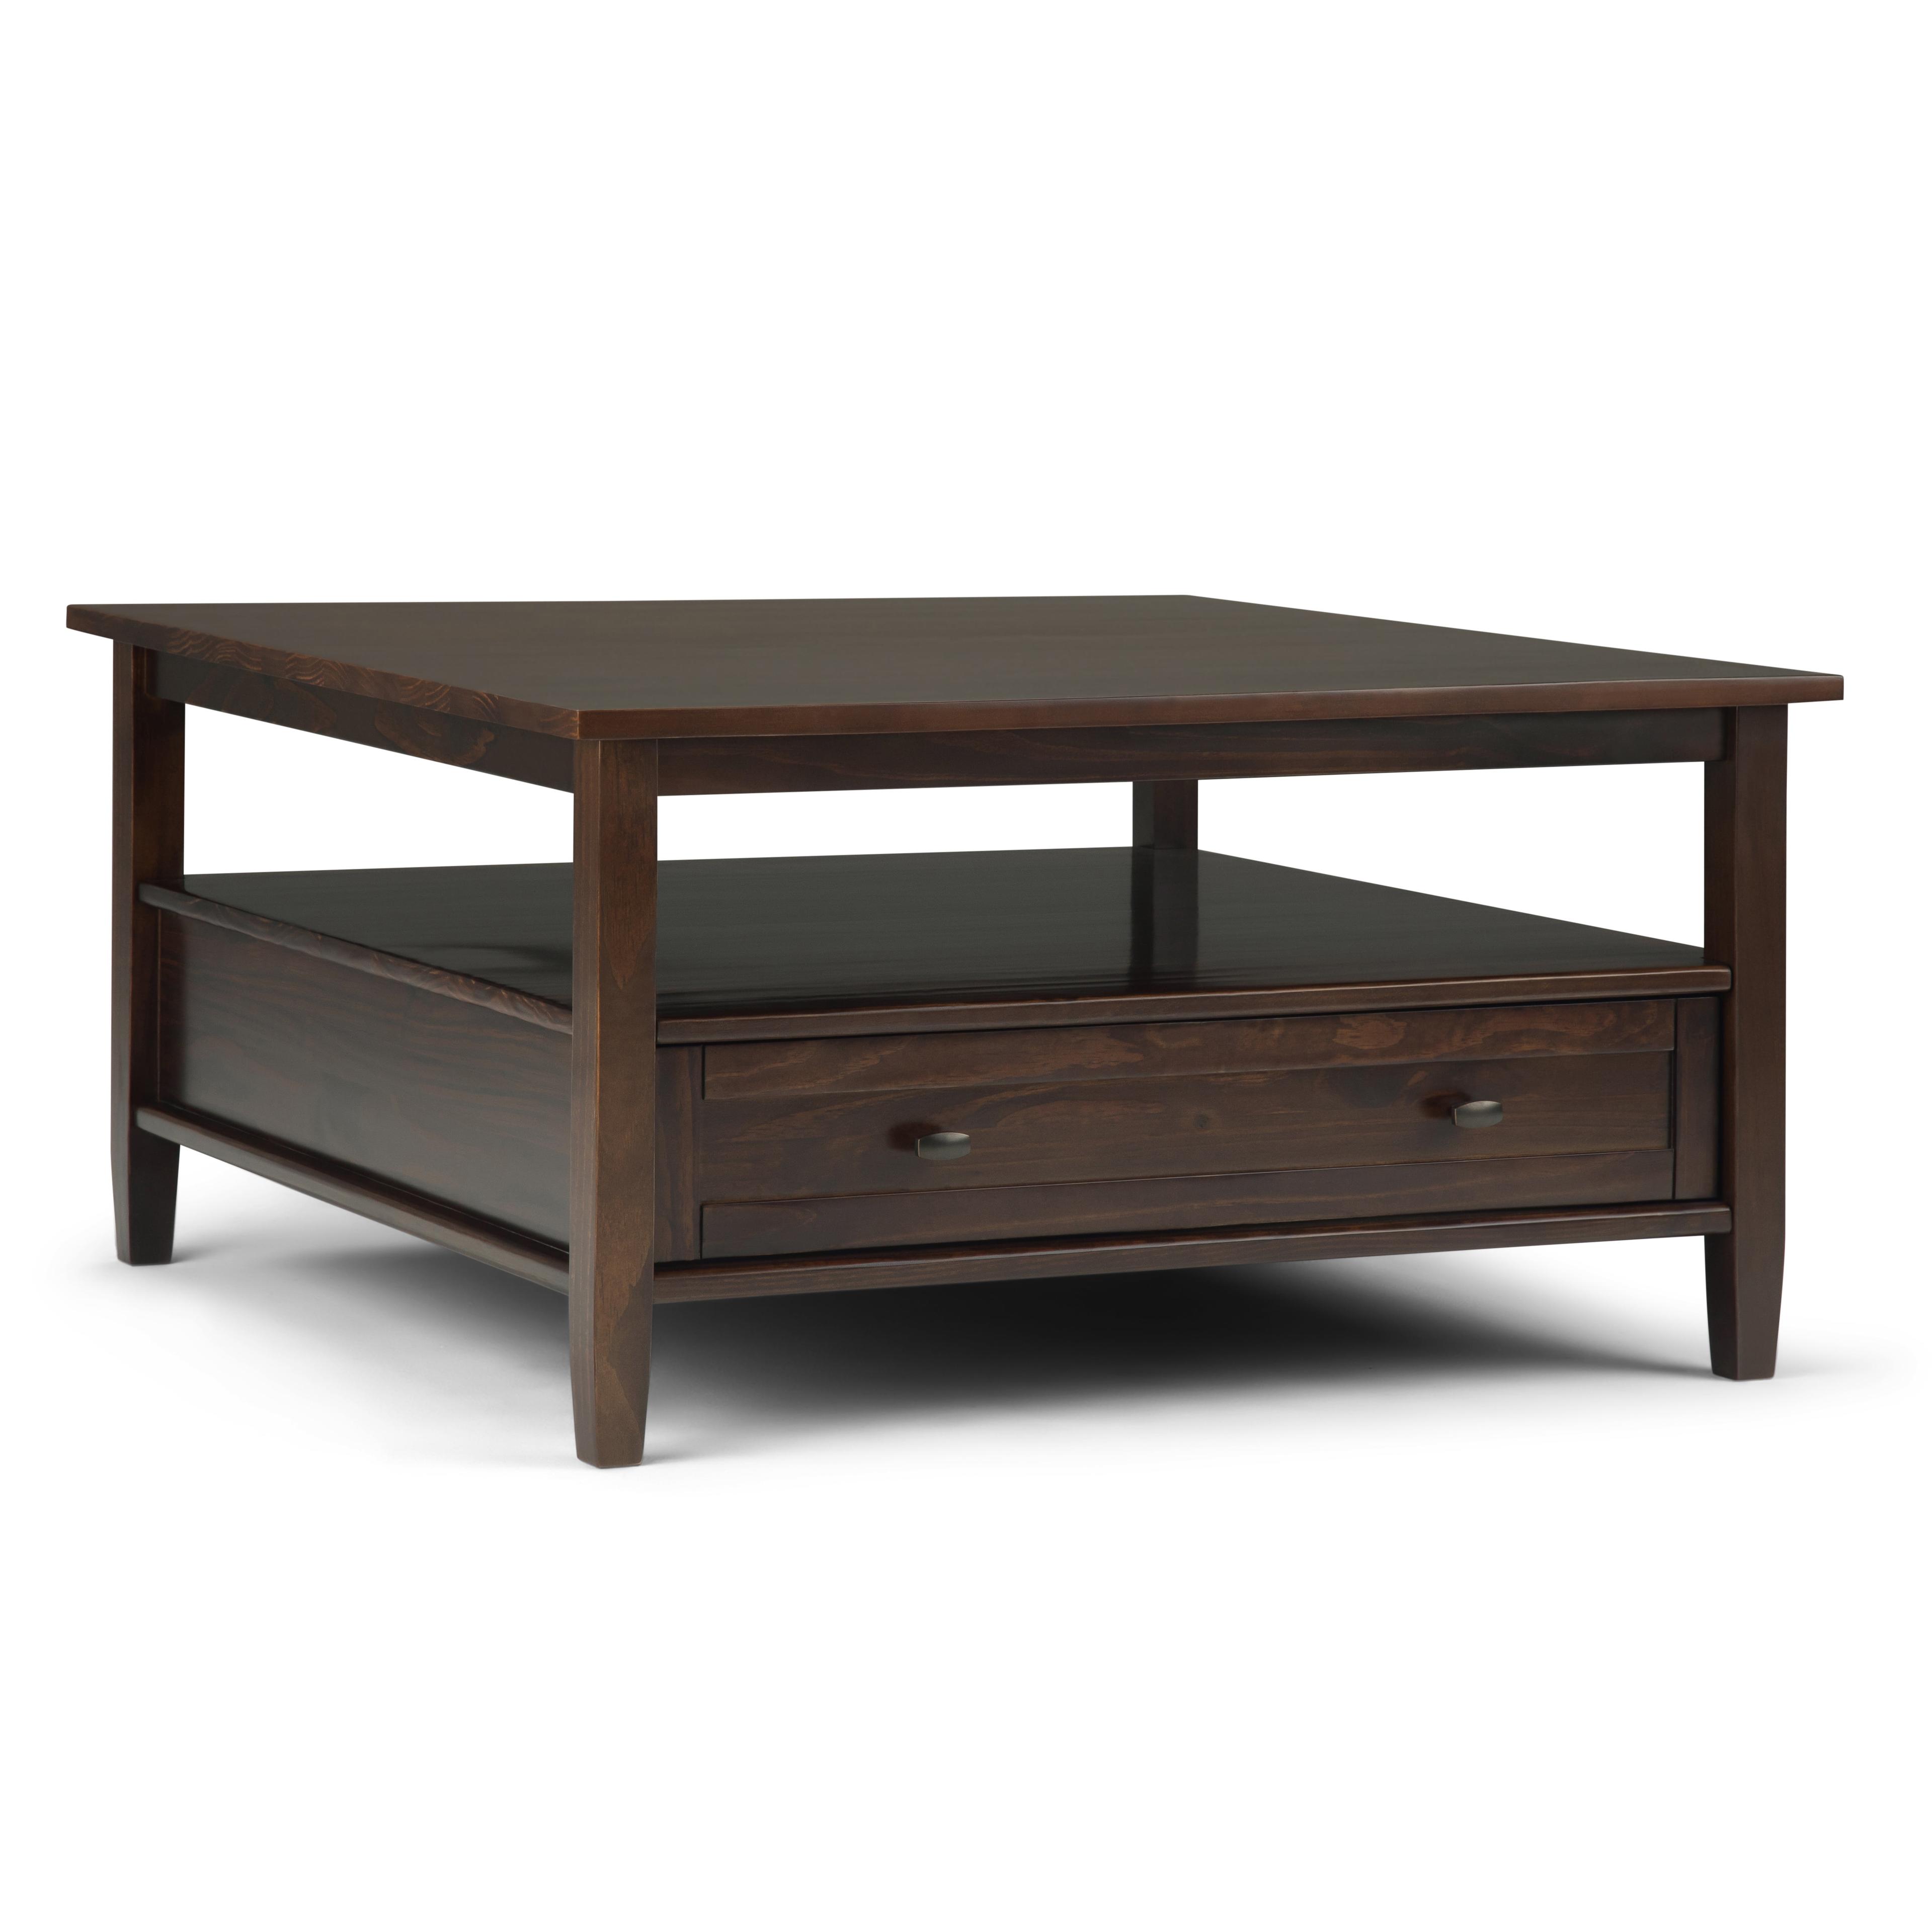 Warm Shaker Tobacco Brown Square Coffee Table with Storage